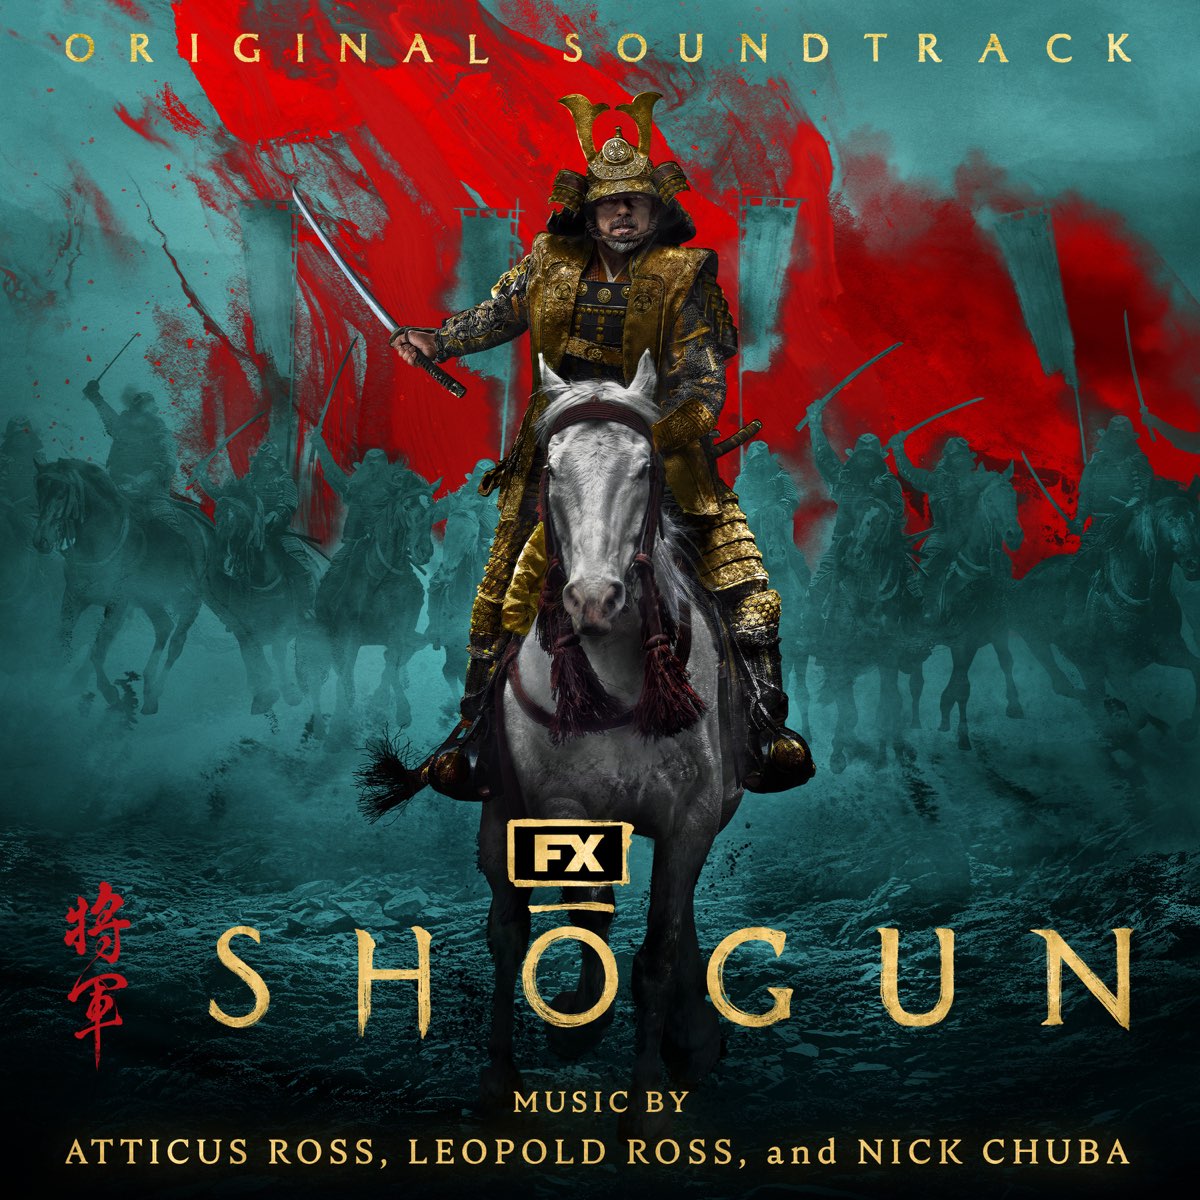 LEOPOLD ROSS and NICK CHUBA explore a whole new musical world of SHOGUN’s Feudal Japan on Film Music Live!